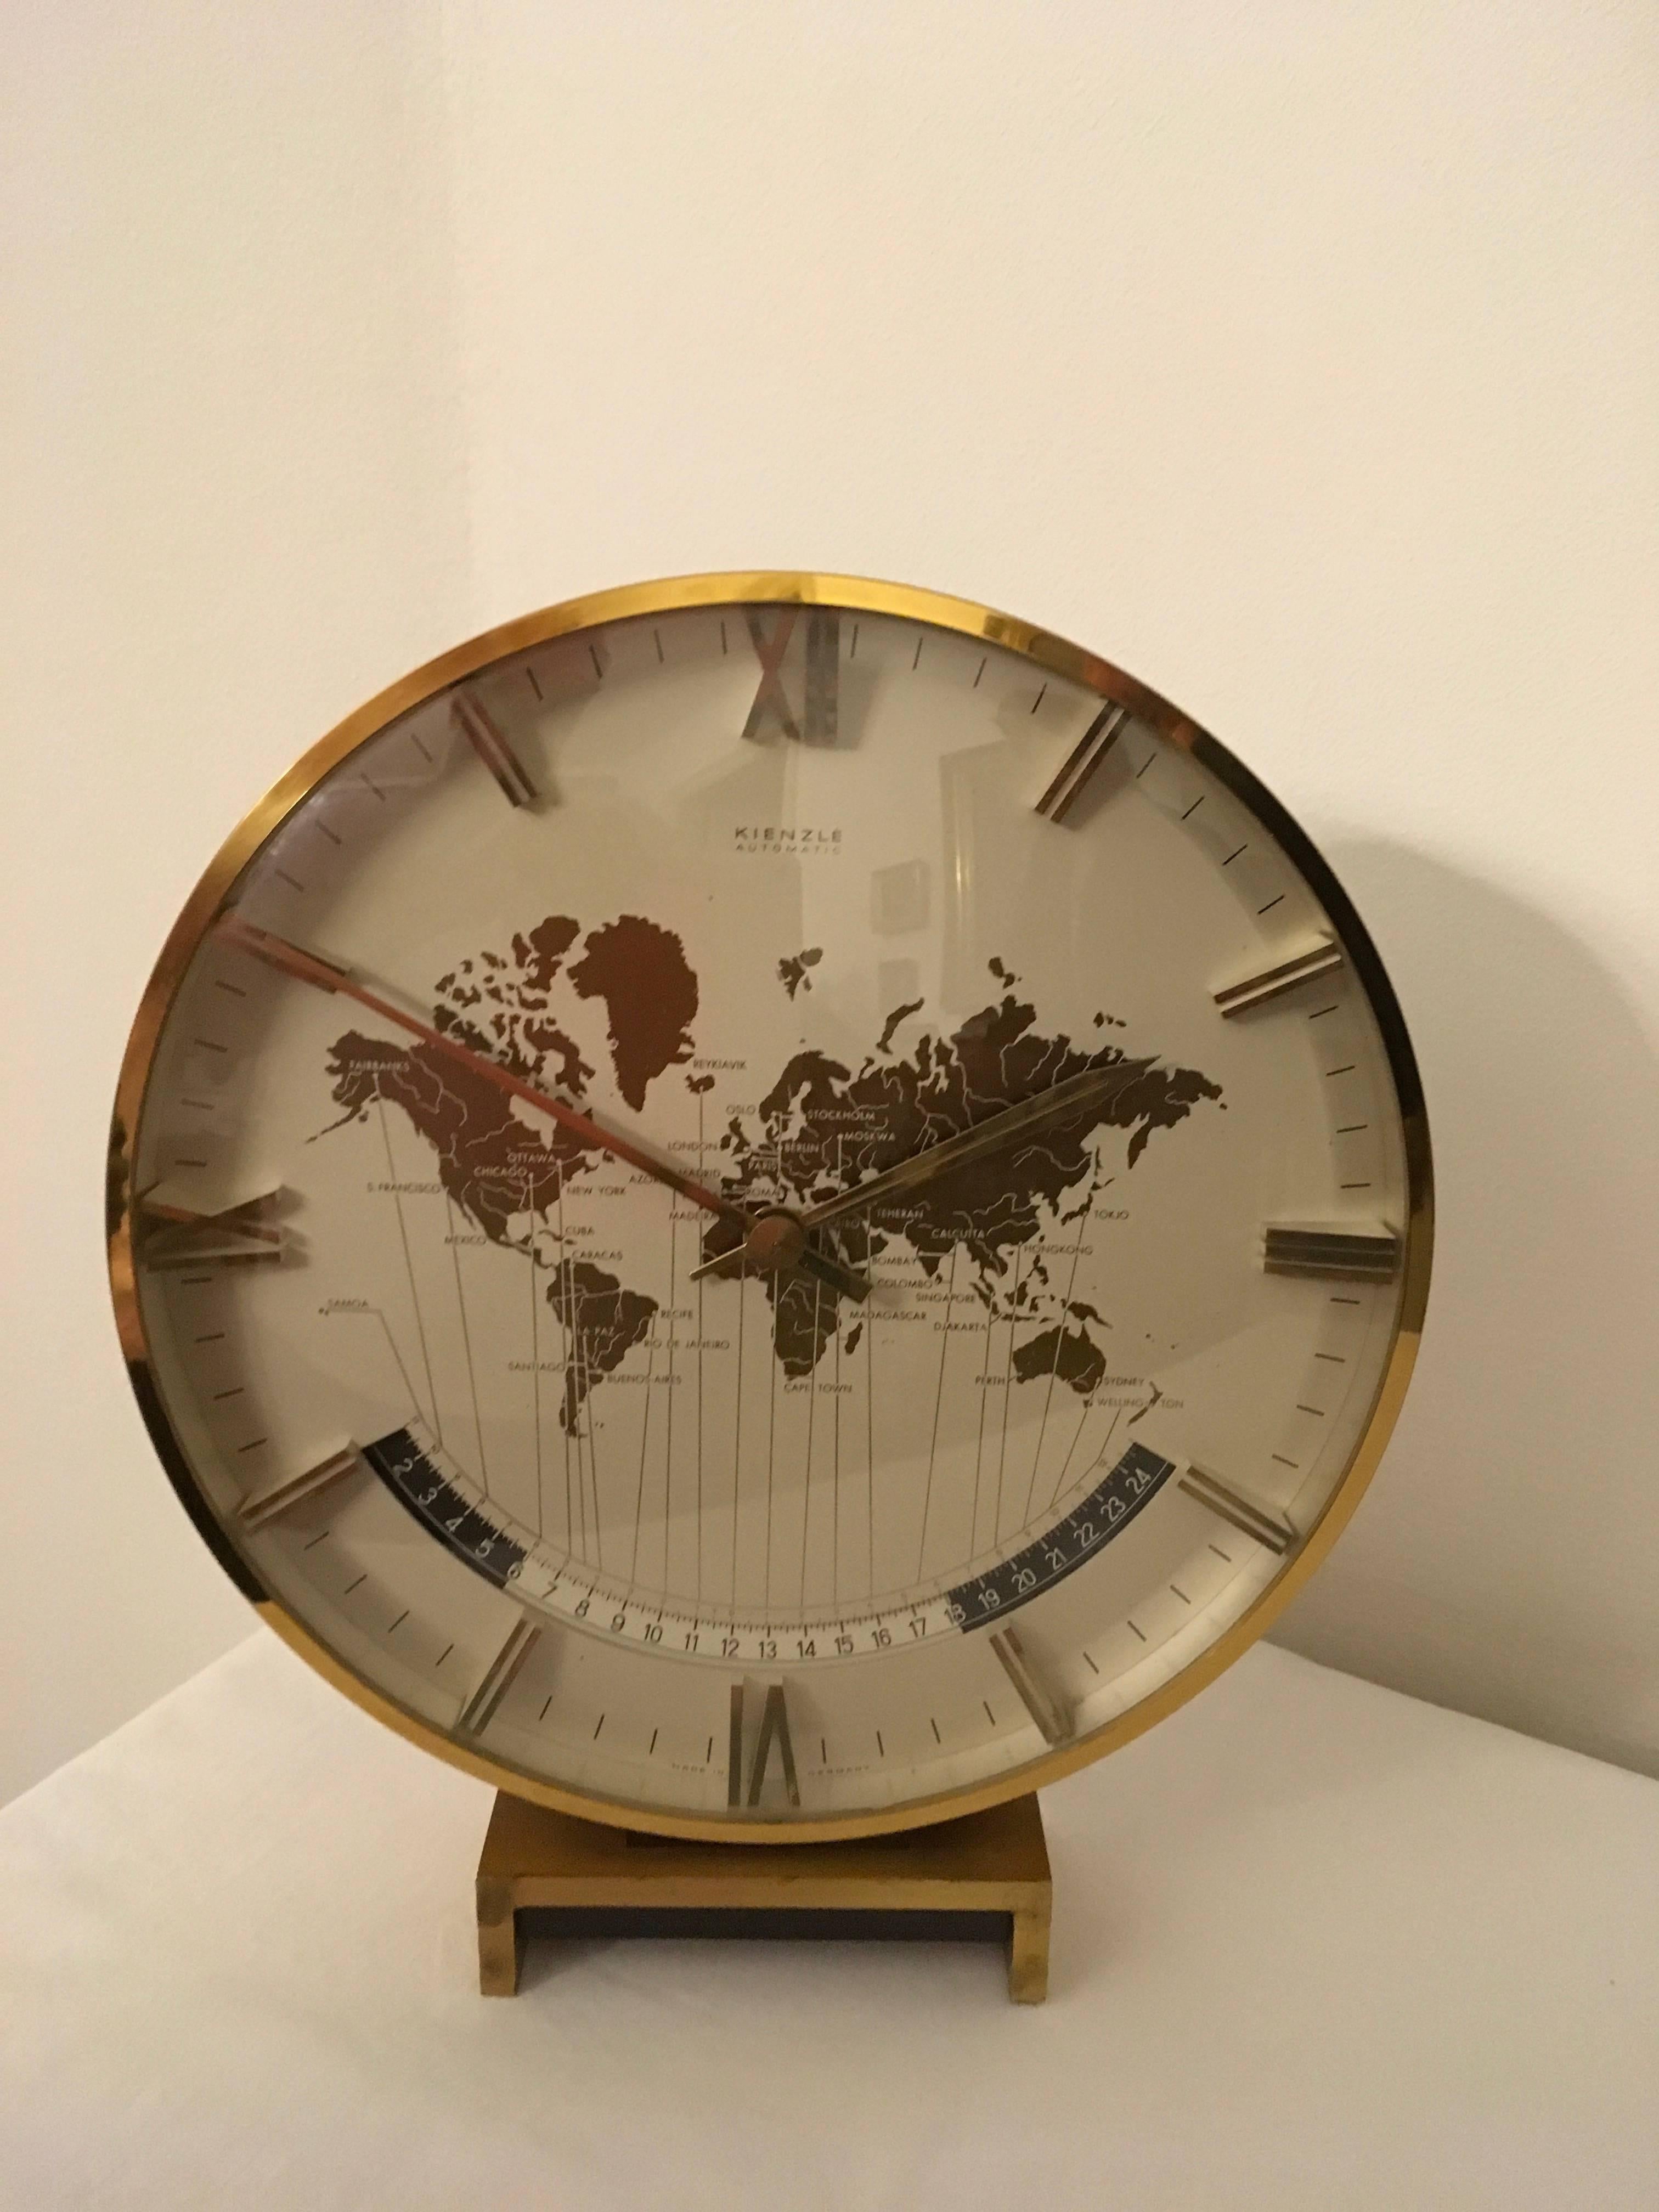 Kienzle automatic world timer zone clock.
An exclusive big table clock from Ø 26cm wonderful clocks face with world map and world time zones, crystal glass, the heavy case and base are of solid brass. Battery movement. The most of Kienzle Clocks